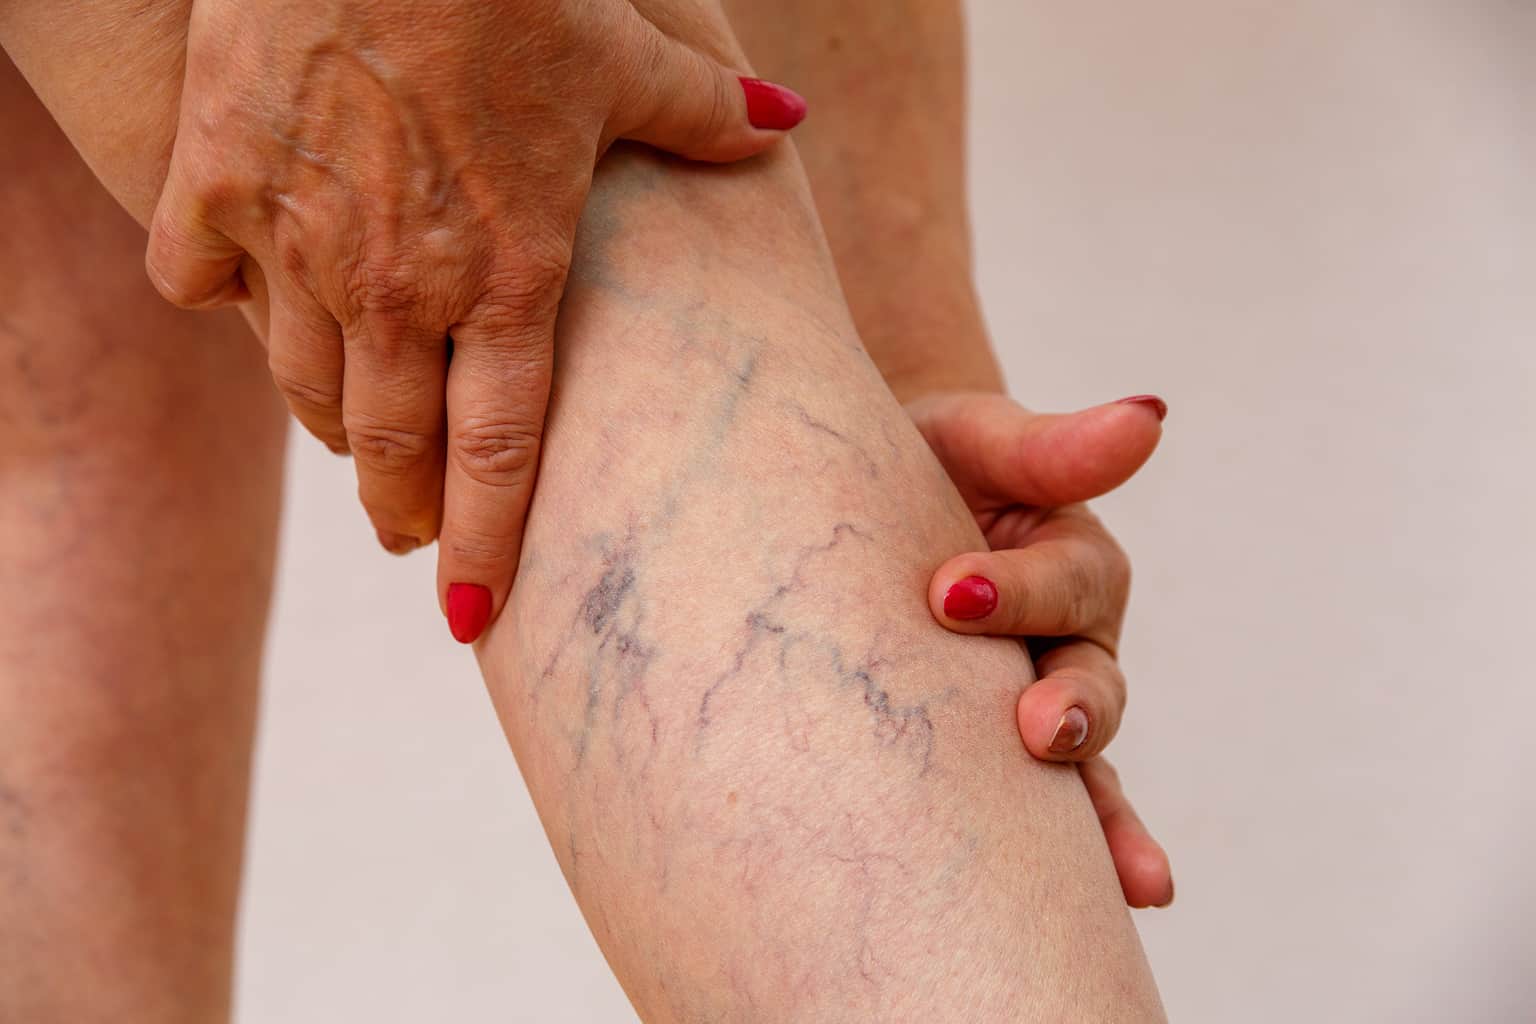 Woman with Closeup of Leg with Varicose Veins